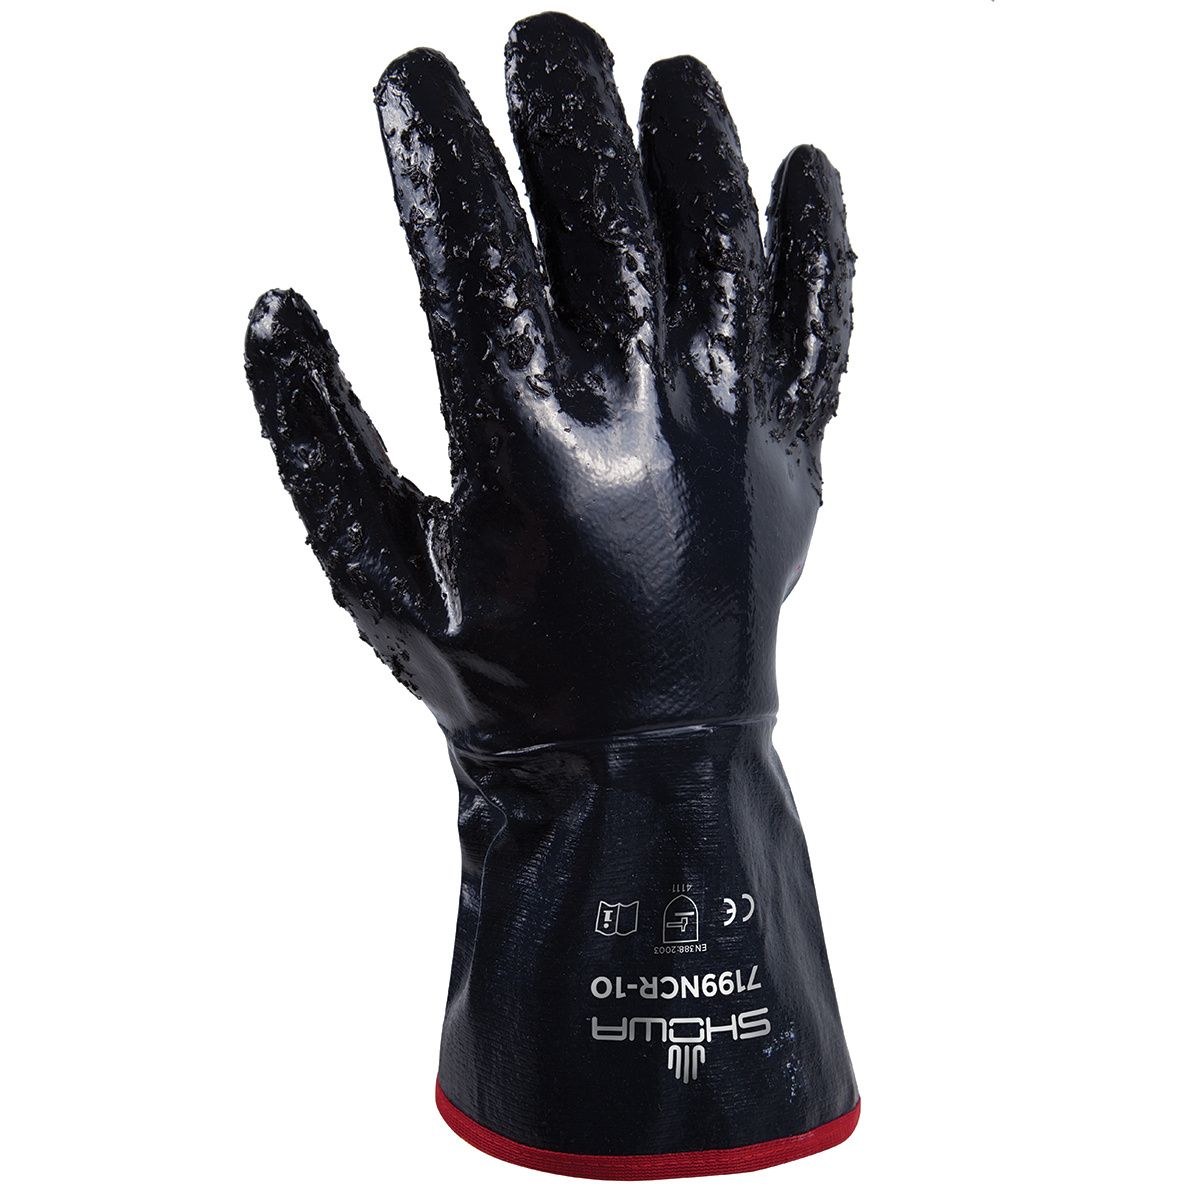 General purpose nitrile-coated, navy, fully coated with sewn-on 5" cuff, rough finish, large